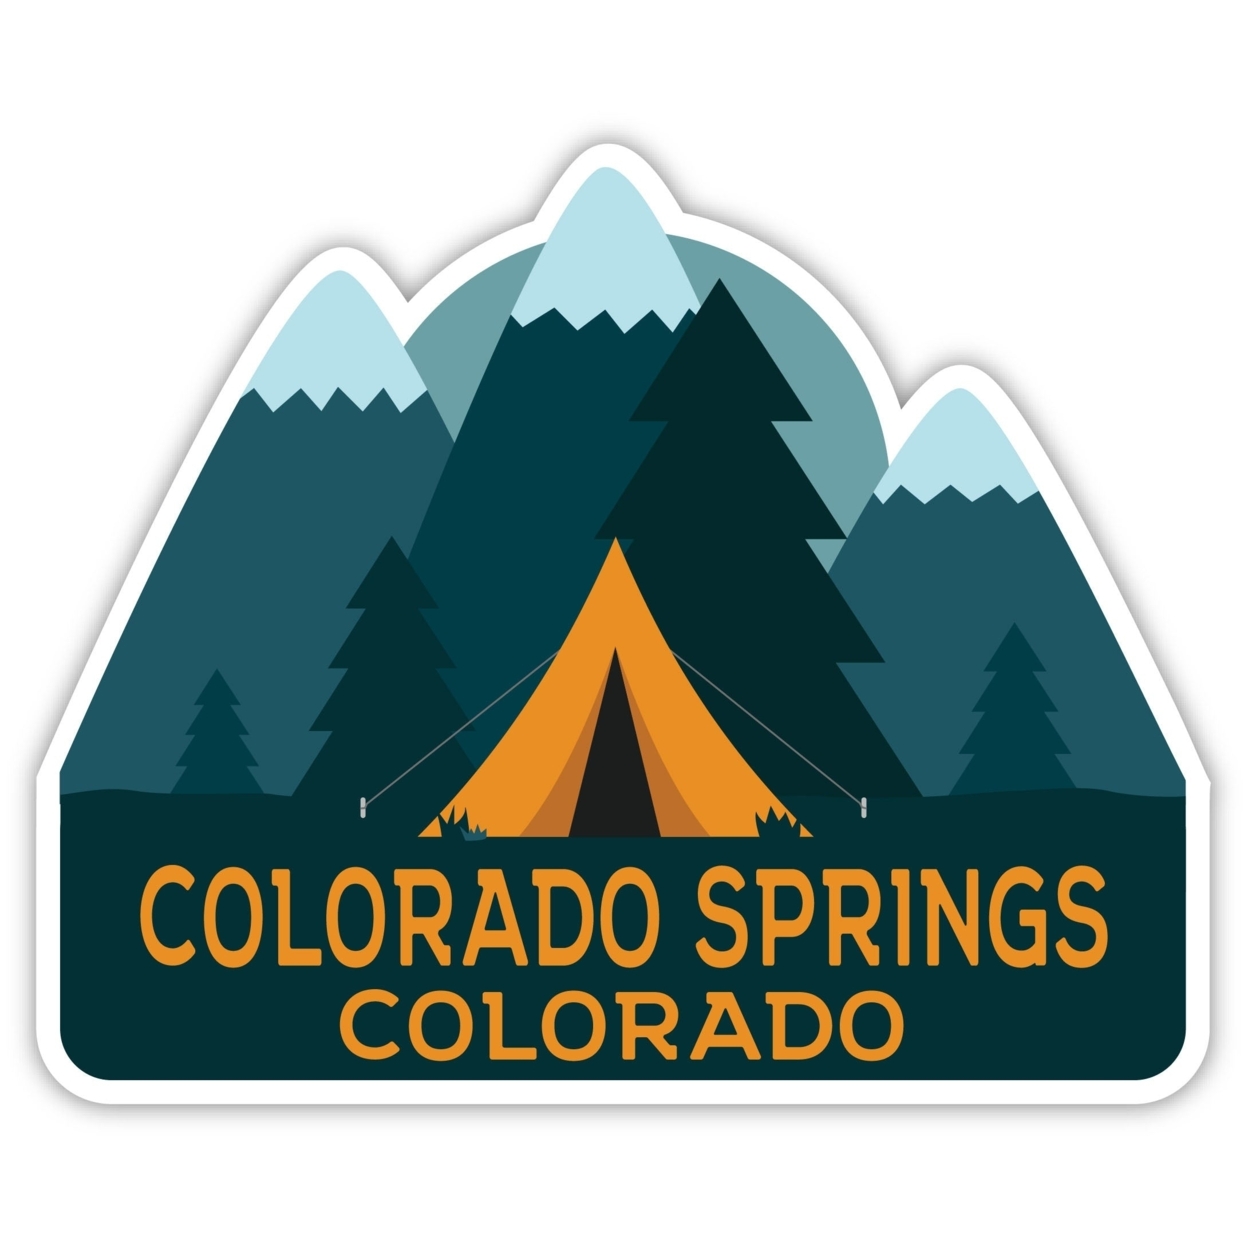 Colorado Springs Colorado Souvenir Decorative Stickers (Choose Theme And Size) - 4-Pack, 8-Inch, Great Outdoors